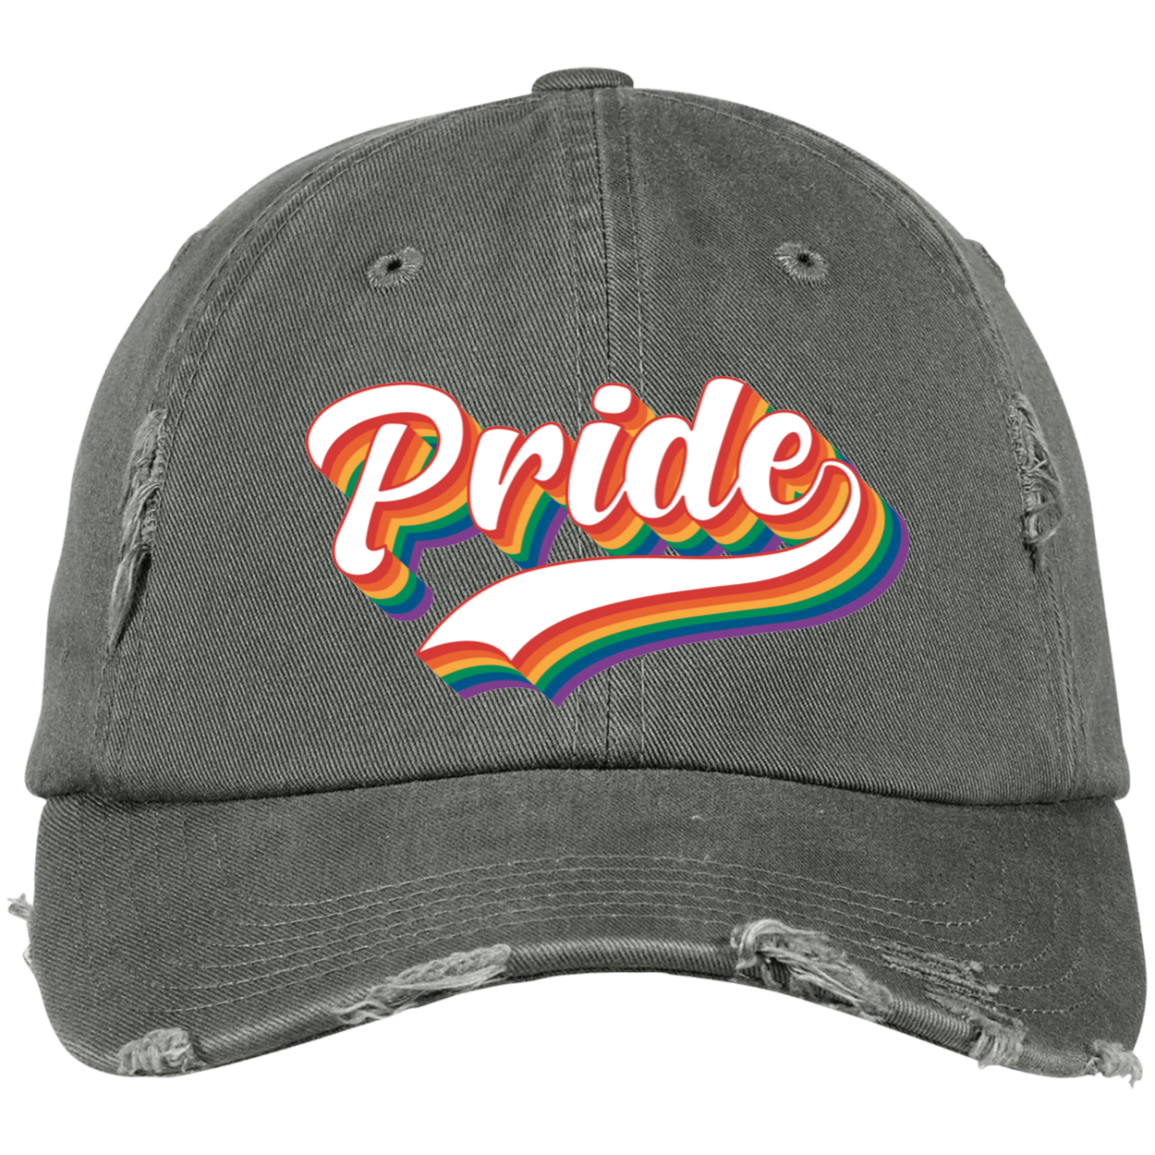 Pride Embroidered Distressed Dad Cap